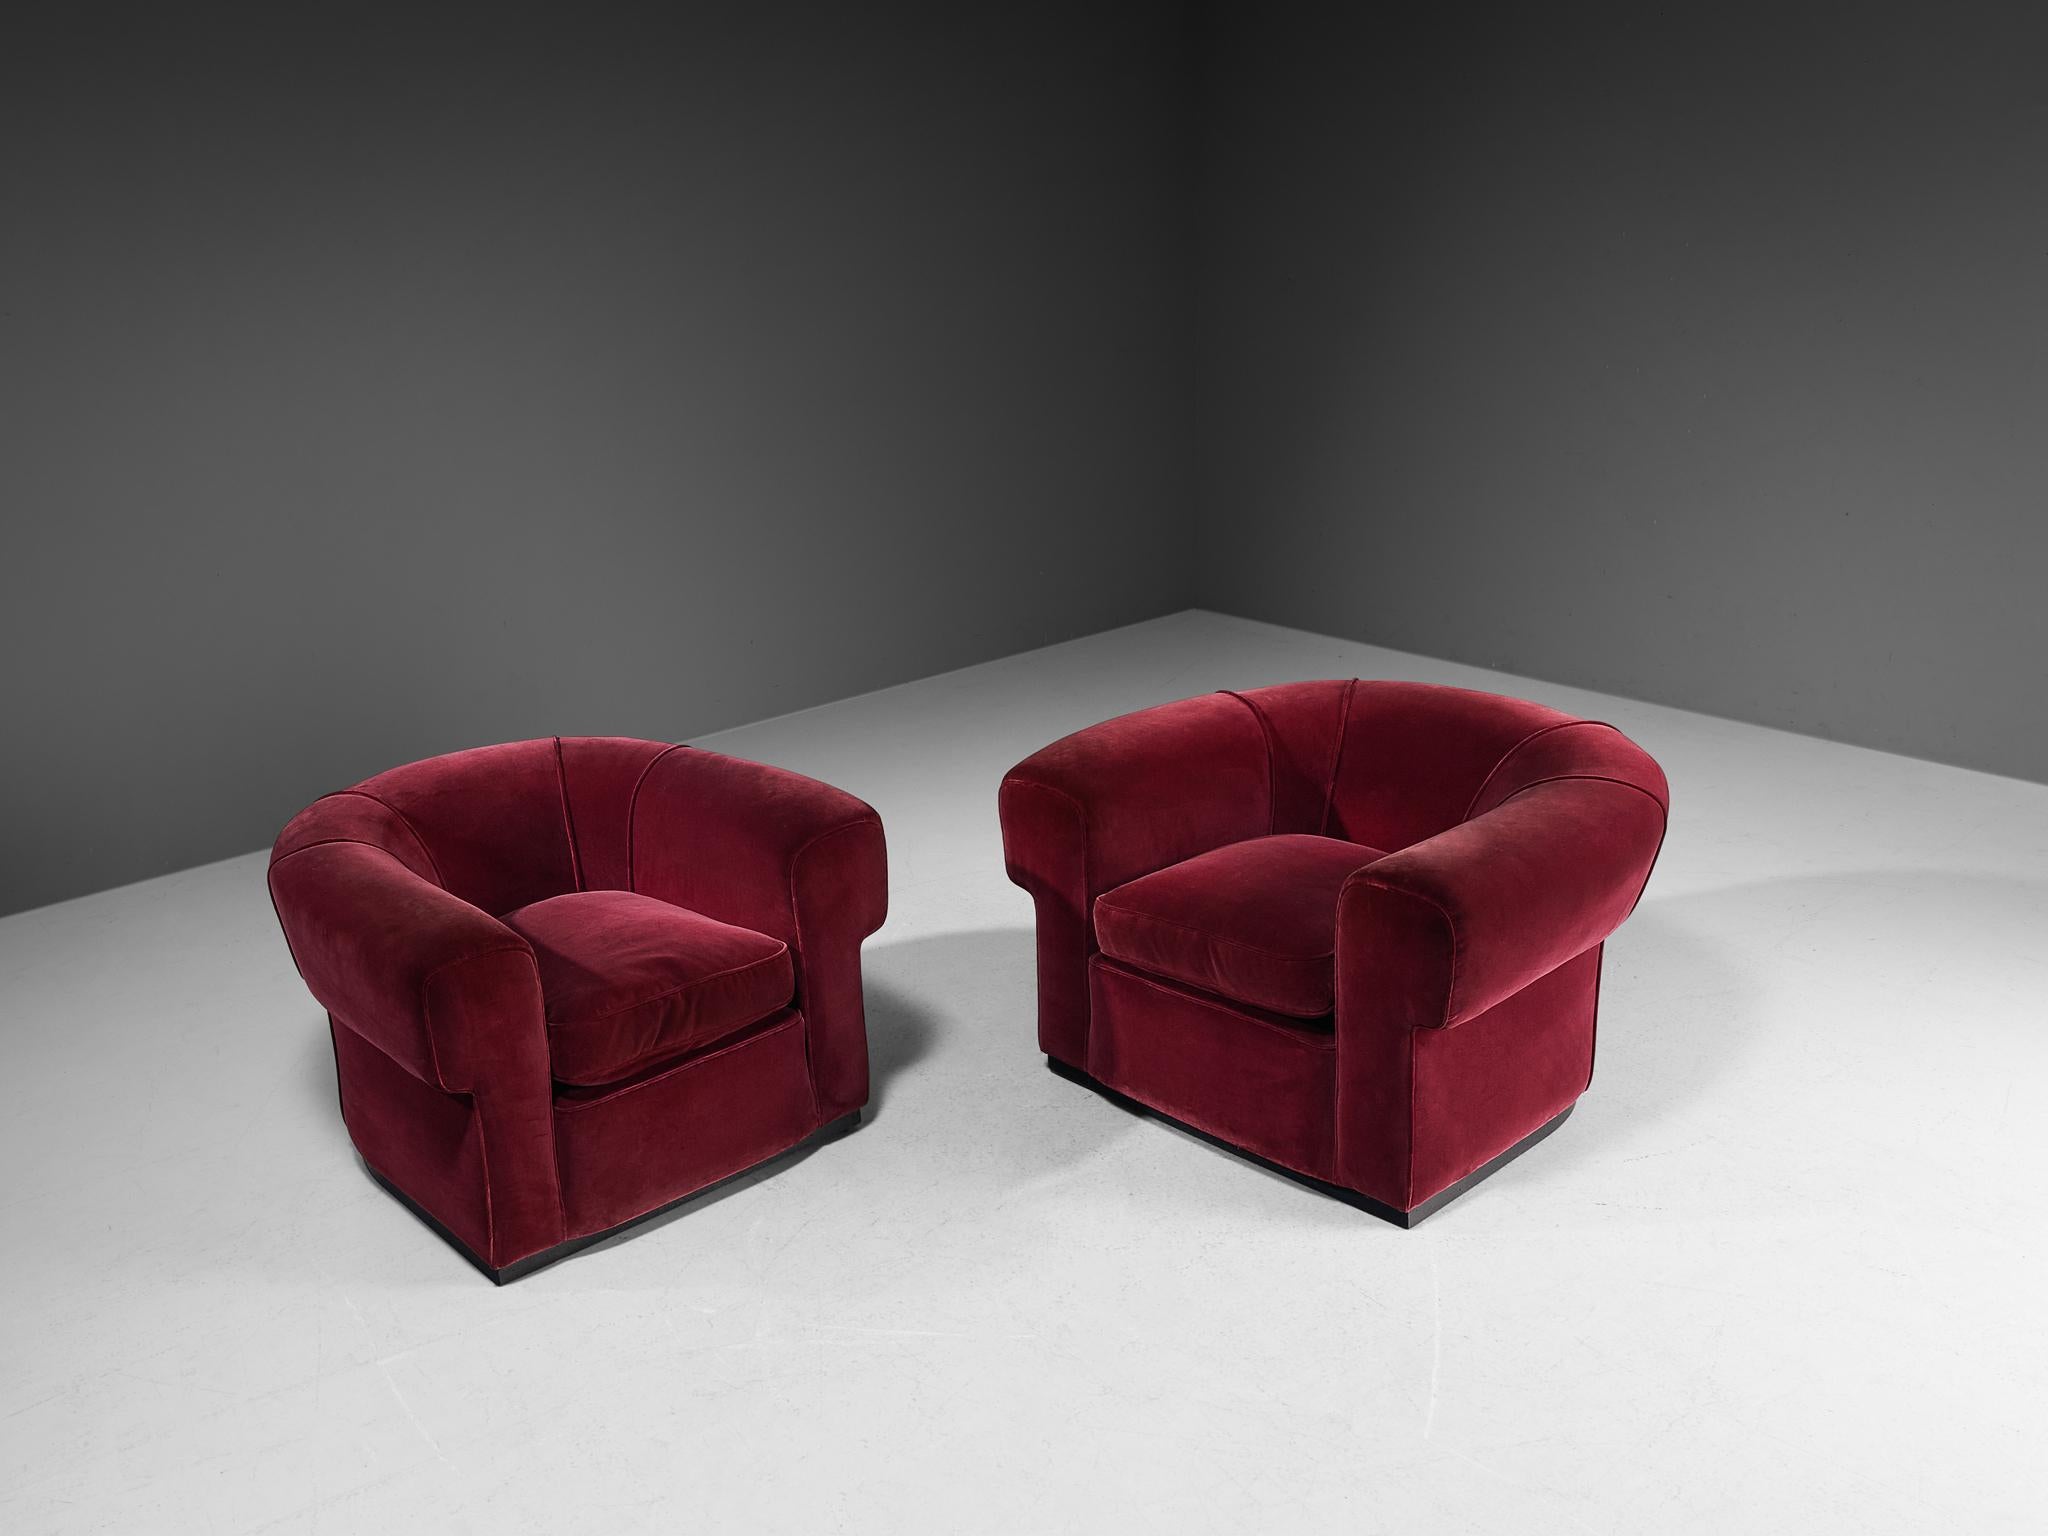 Pair of lounge chairs, velvet upholstery, lacquered wood, Italy, 1940s.
 
This exquisite pair of lounge chairs of Italian origin undoubtedly breathes the late Art Deco Period of the 1940s. The design has a certain theatrical aesthetic with curved